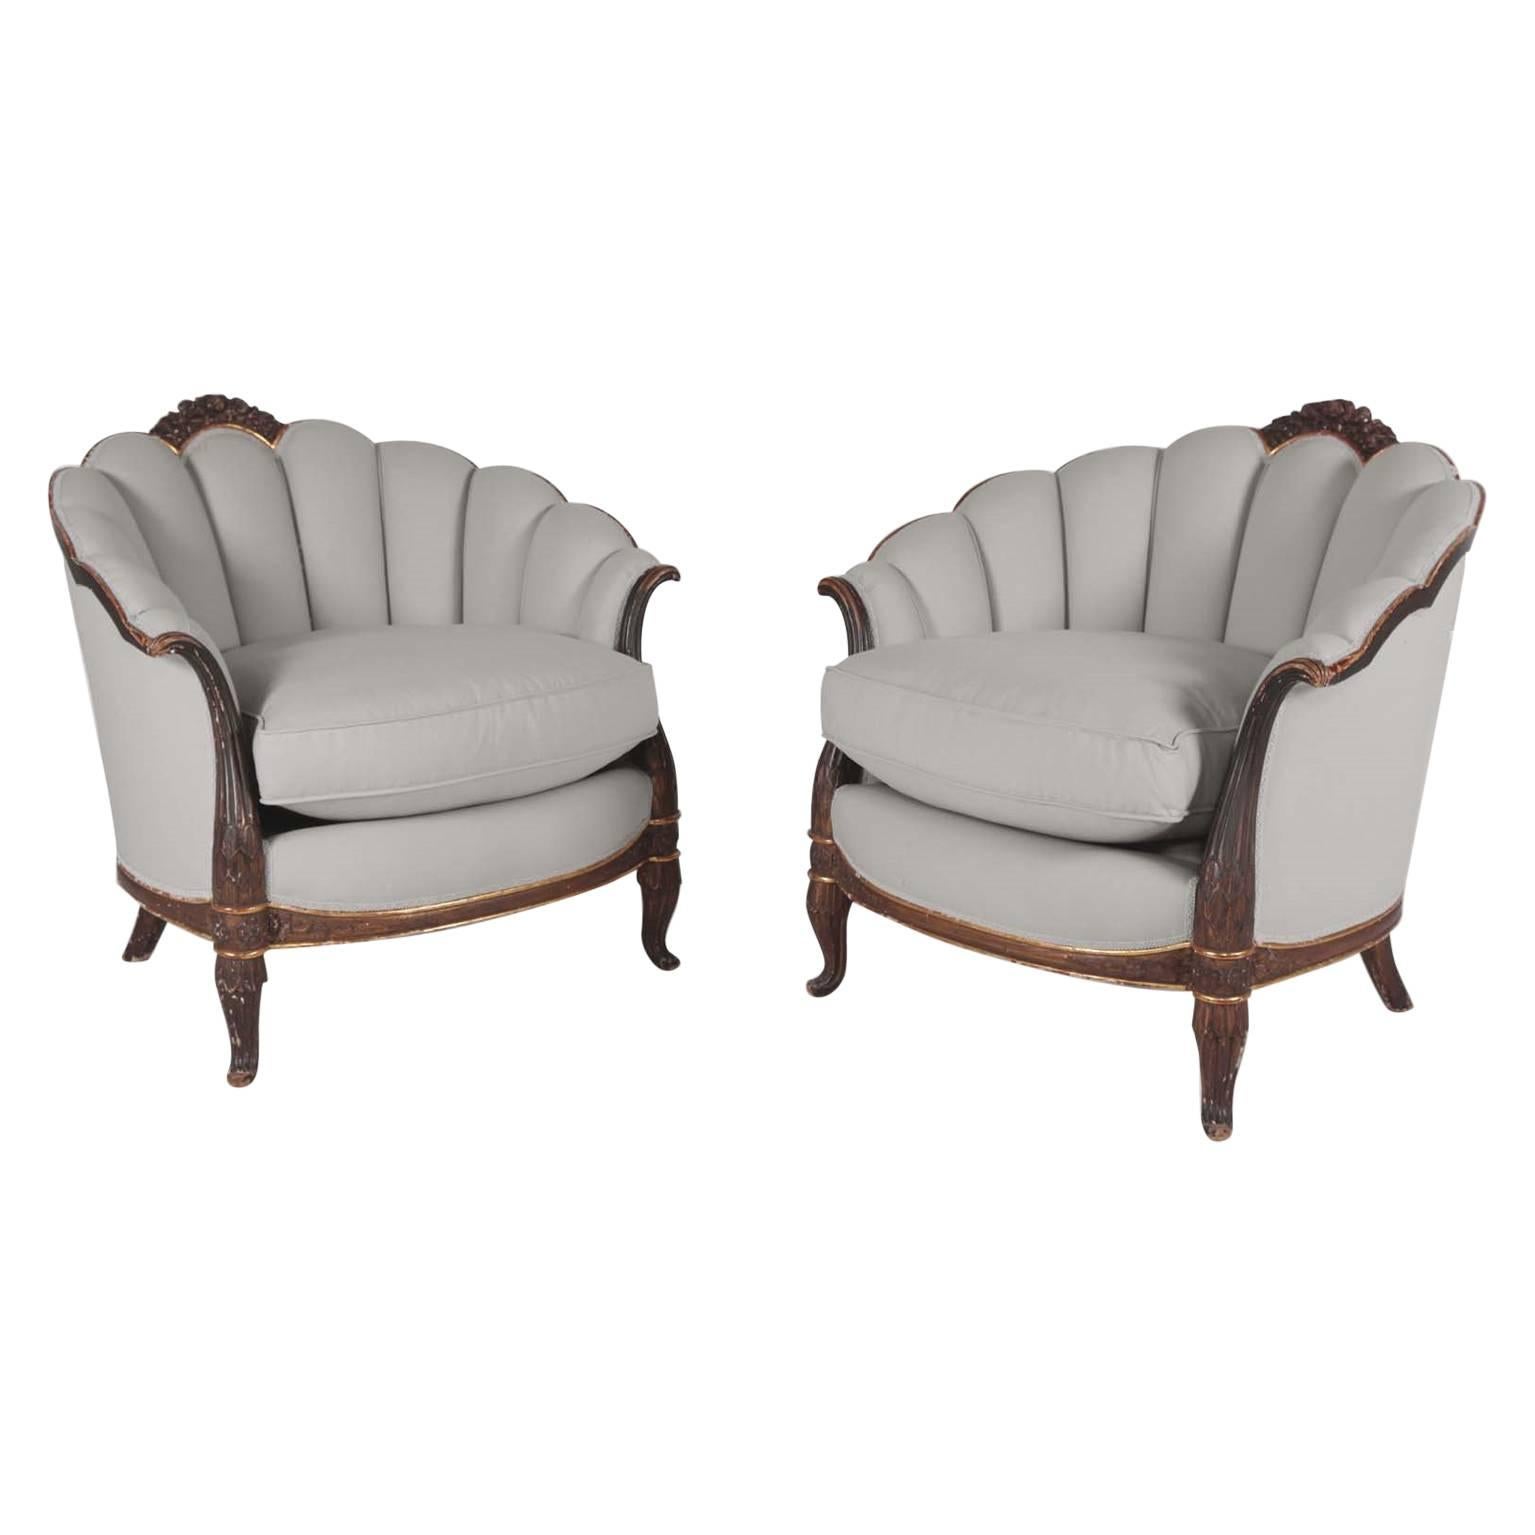 Beautiful Pair of 1925 French Armchairs Designed by Maurice Dufrène For Sale